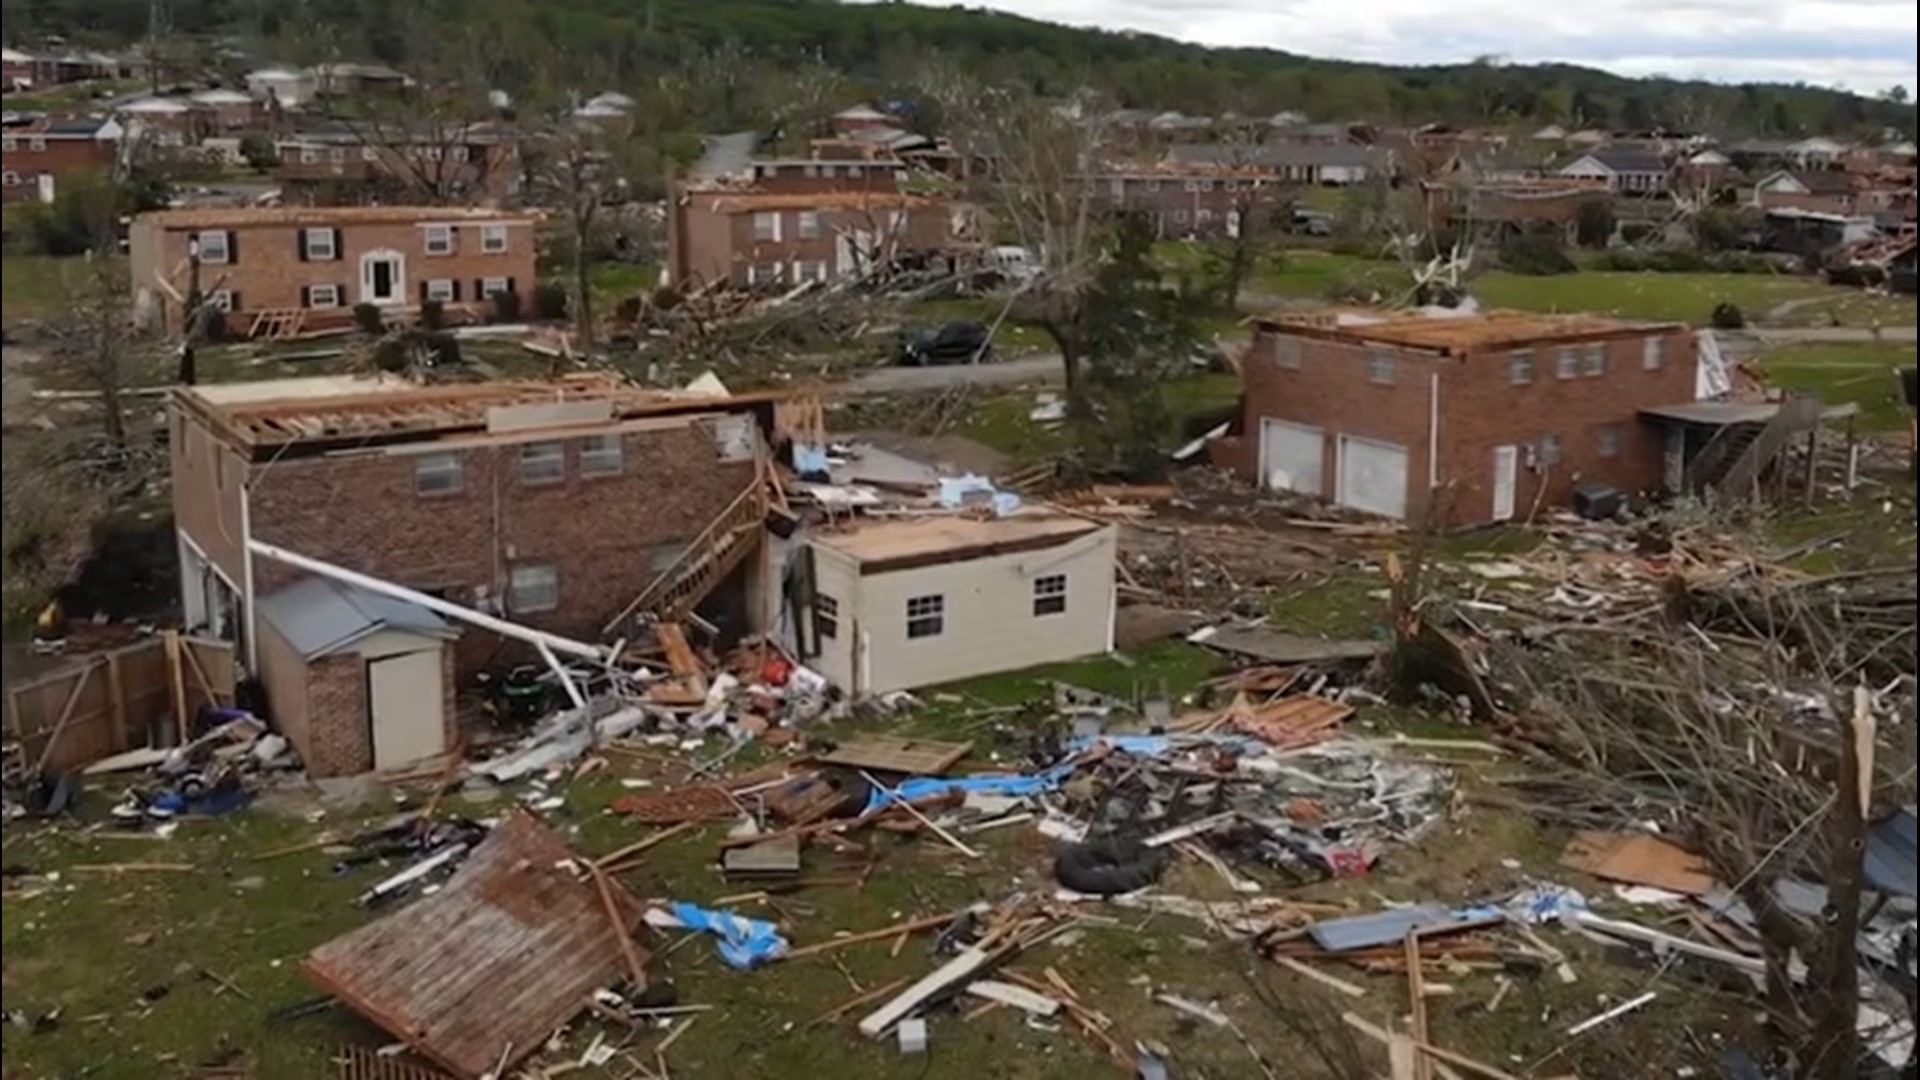 An EF-3 tornado tore through Hamilton County, Tennessee causing two fatalities and destroying over 9,000 structures. This is an aerial view over Chattanooga.